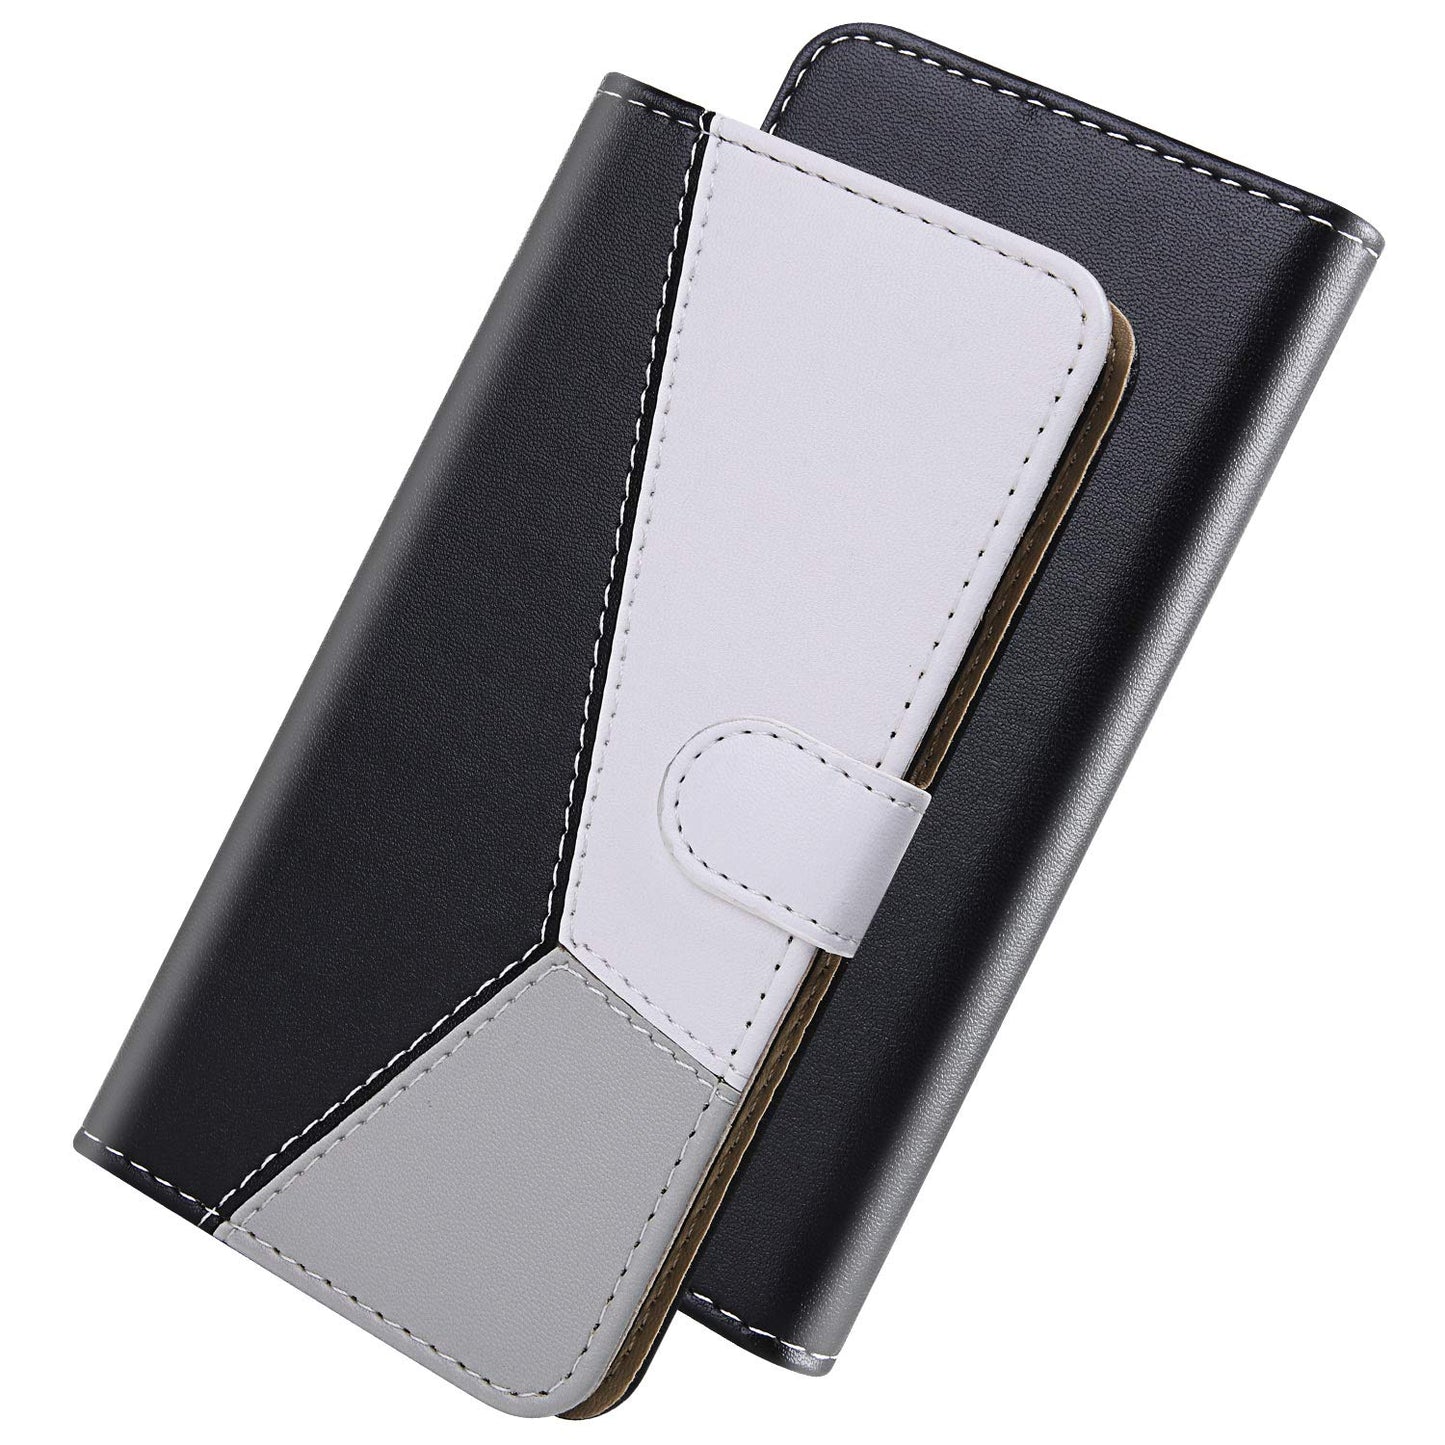 Casekis Three-Color Stitching PU Leather Flip Wallet Case Black